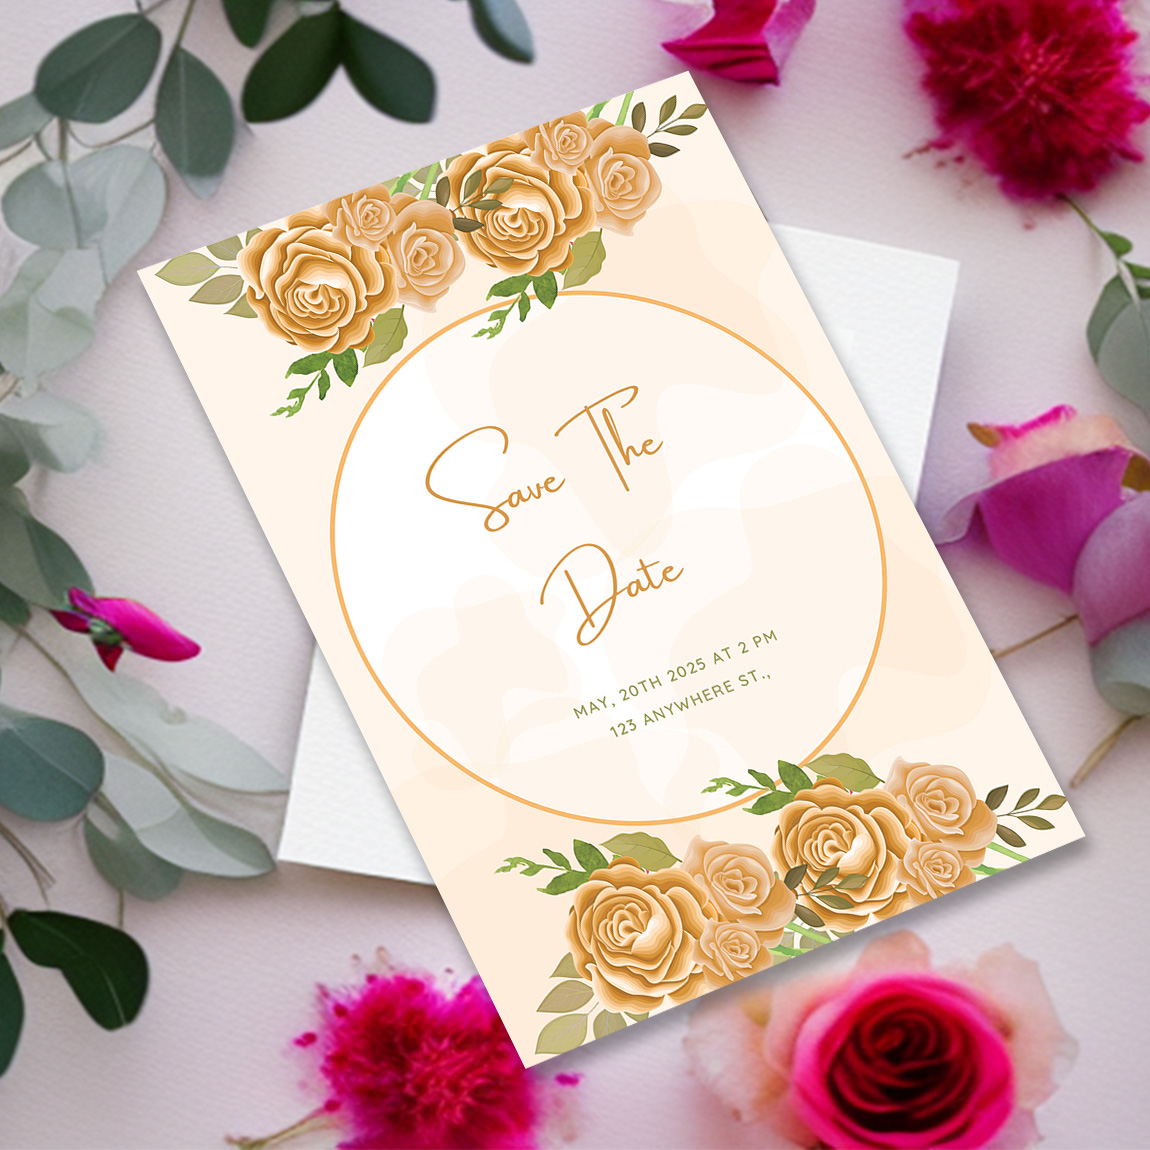 Image with gorgeous wedding invitation card with golden roses and leaves.